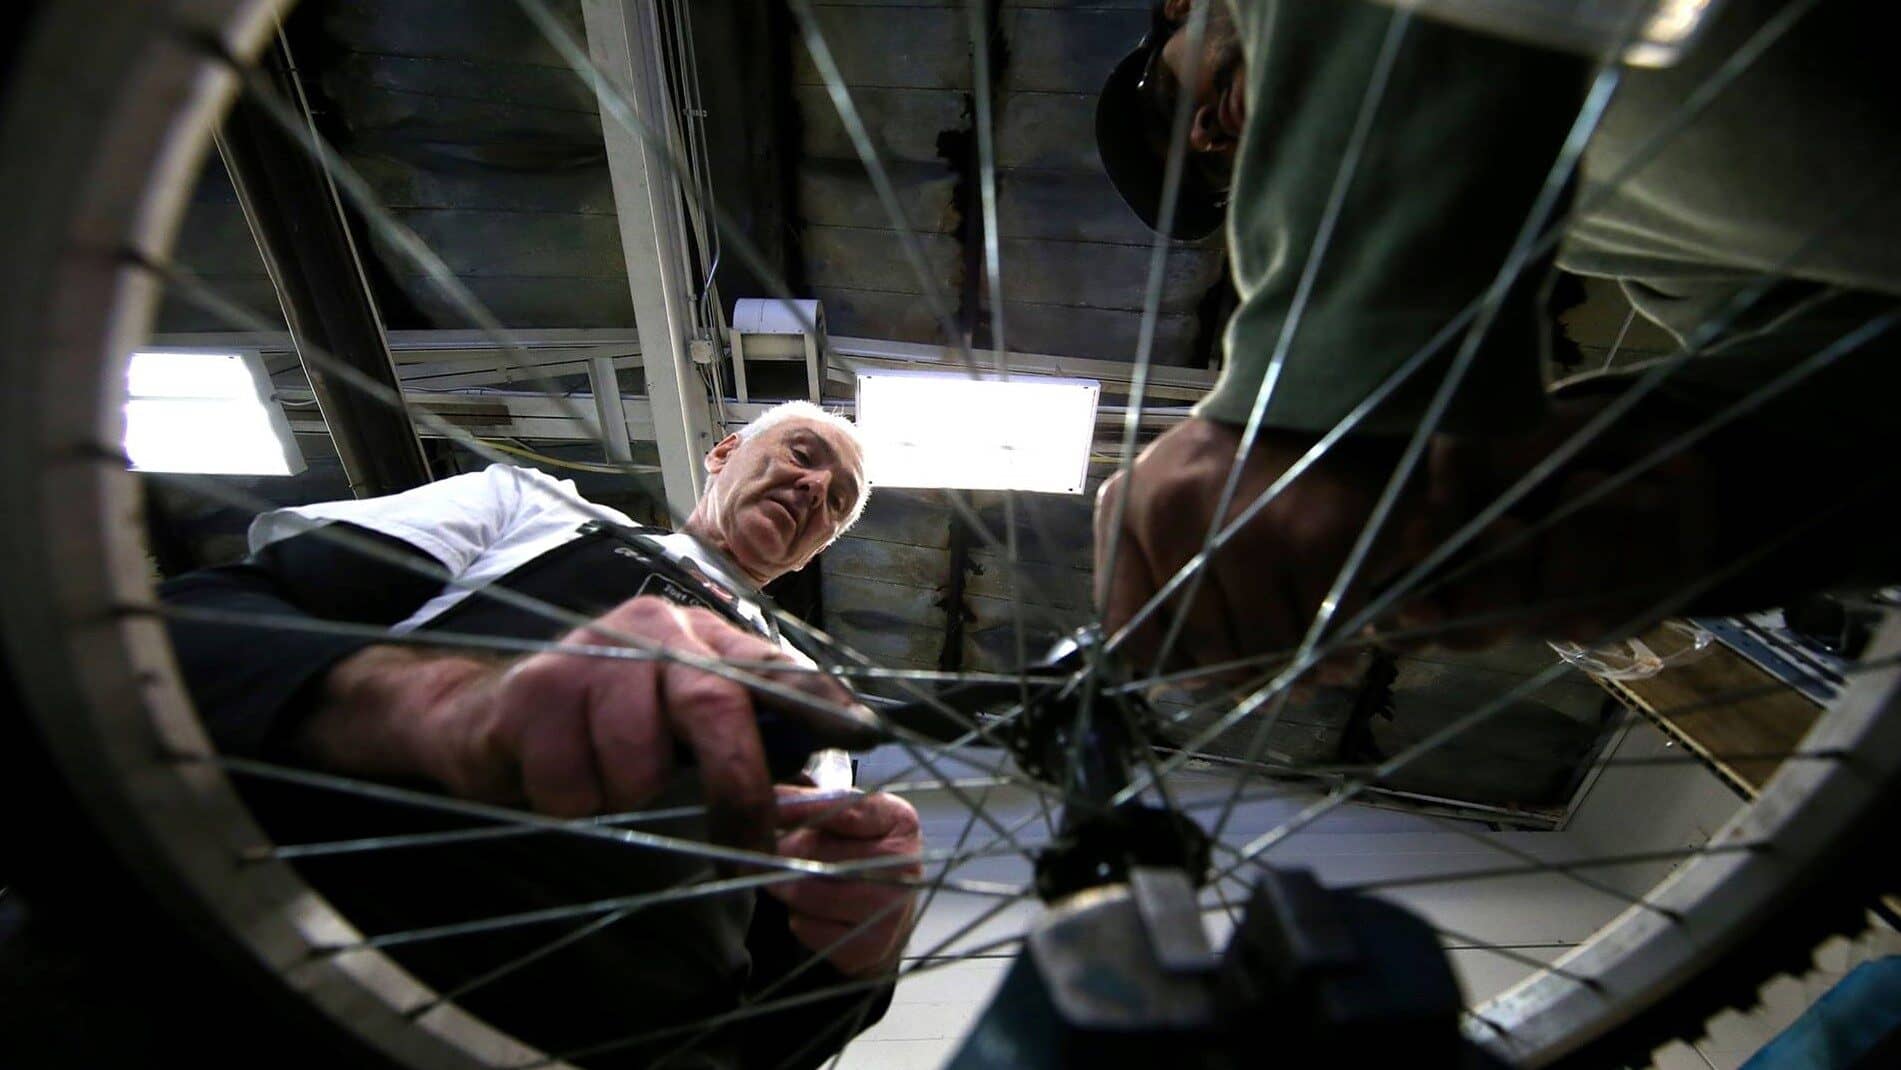 Image: older person working on a bike at the Fort Collins Bike Shop where Rafael helped build a legacy for himself with his work and kindness